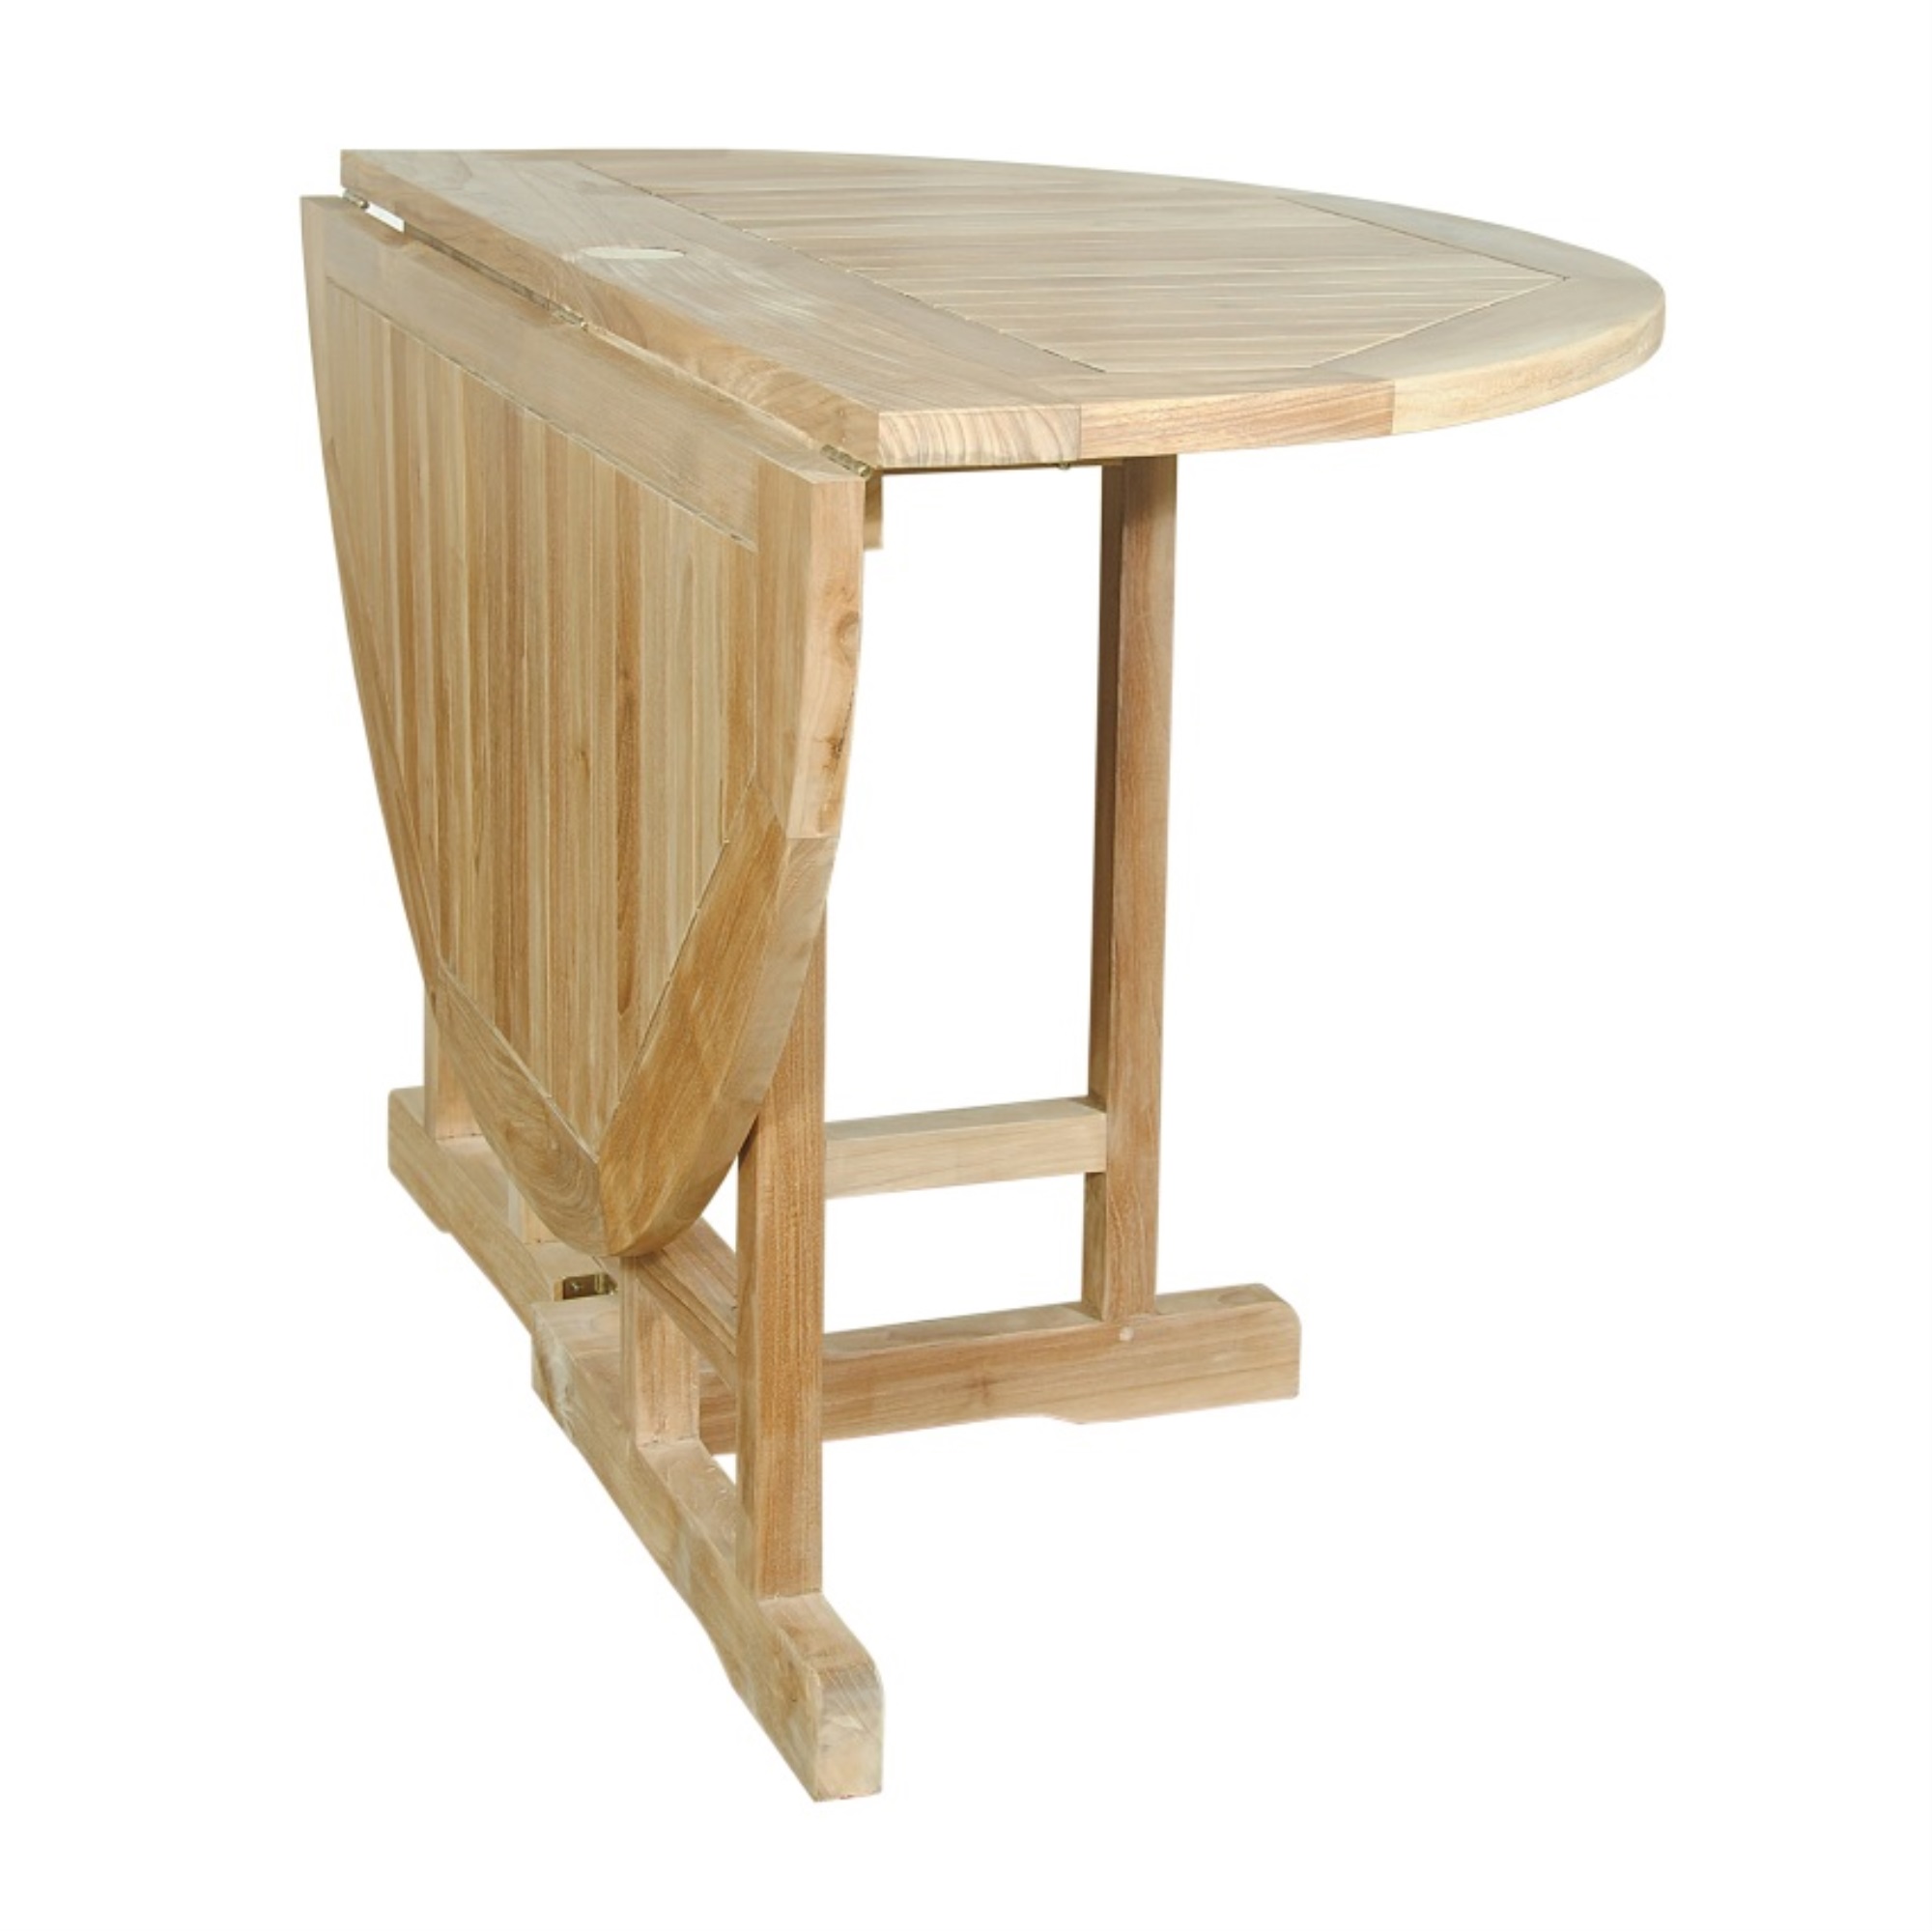 Anderson Teak Butterfly 47" Round Folding Table - image 3 of 4